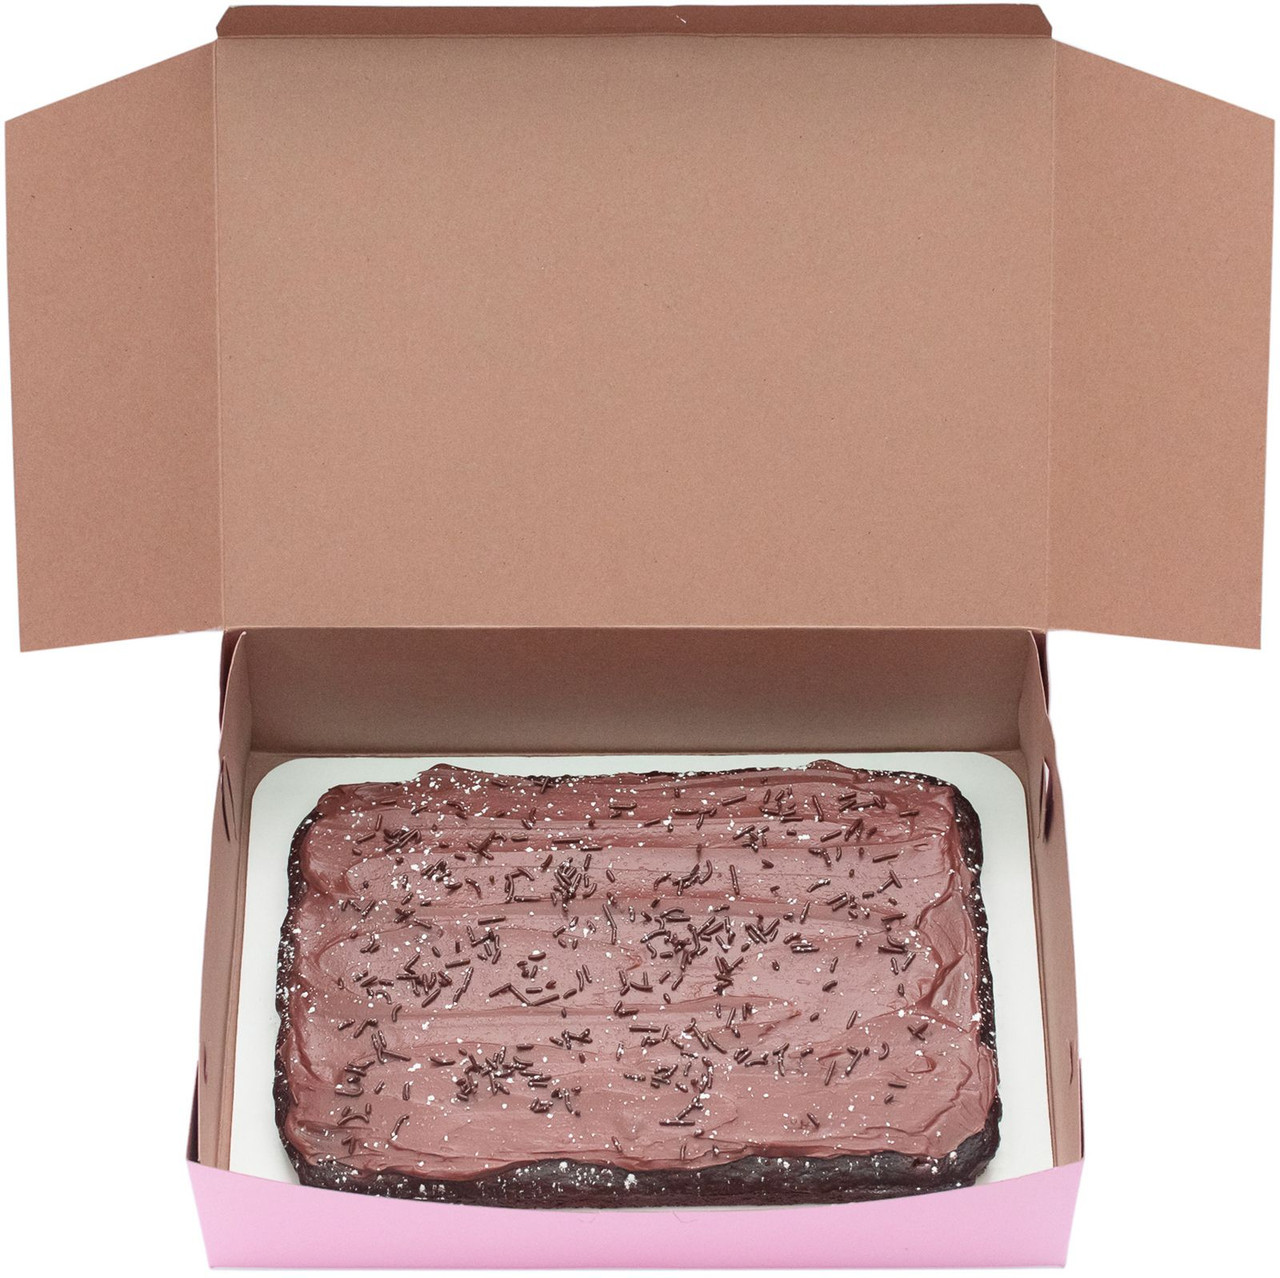 Made in USA Recycled Pink Kraft Cake Box & Rectangular Cake Boards Pack of 5 – Front Loading 